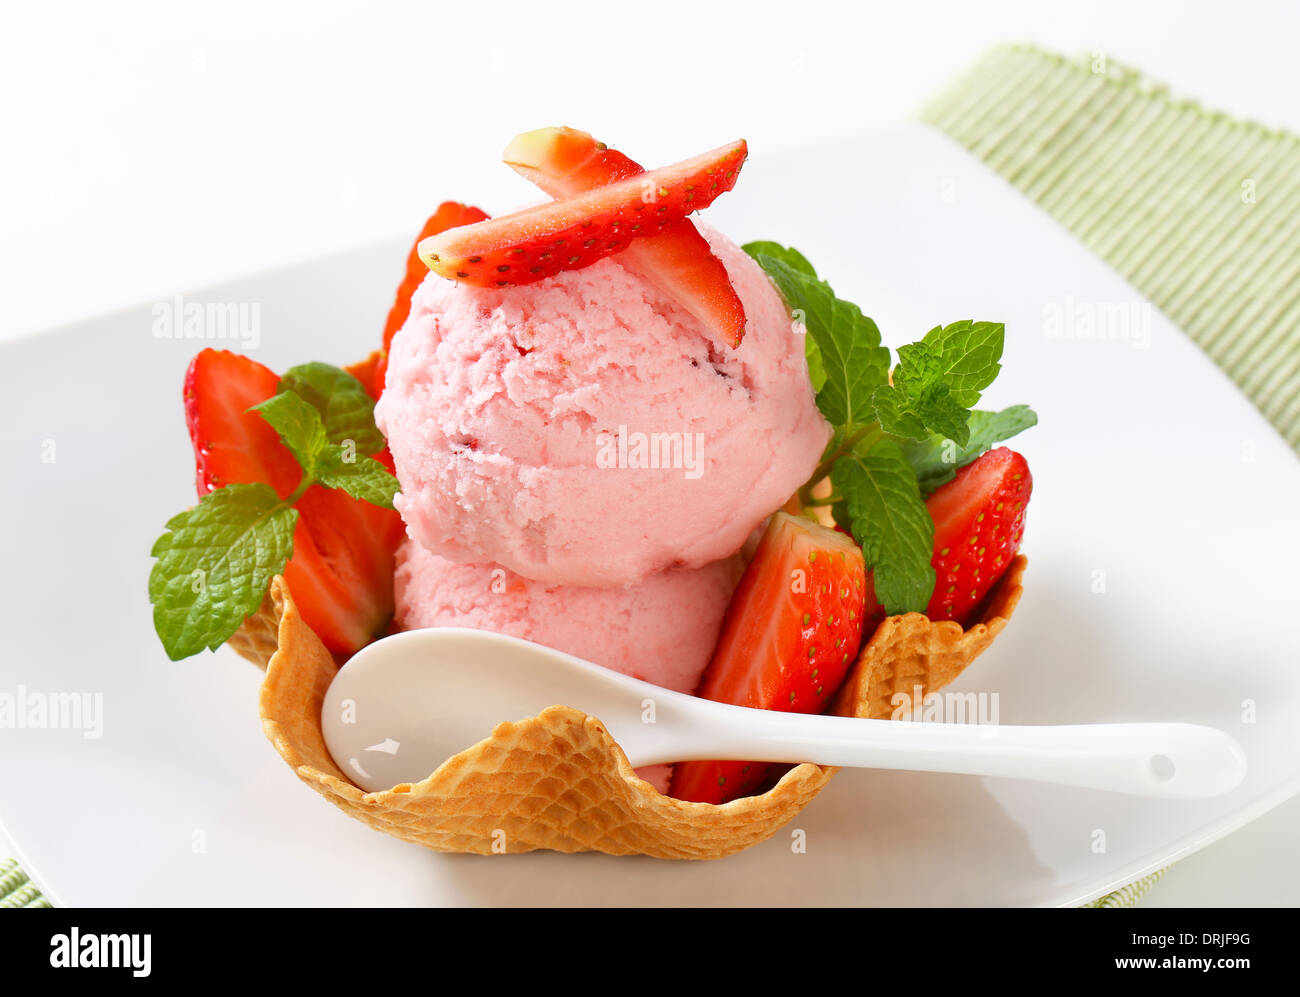 Scoops of strawberry ice cream in waffle basket Stock Photo